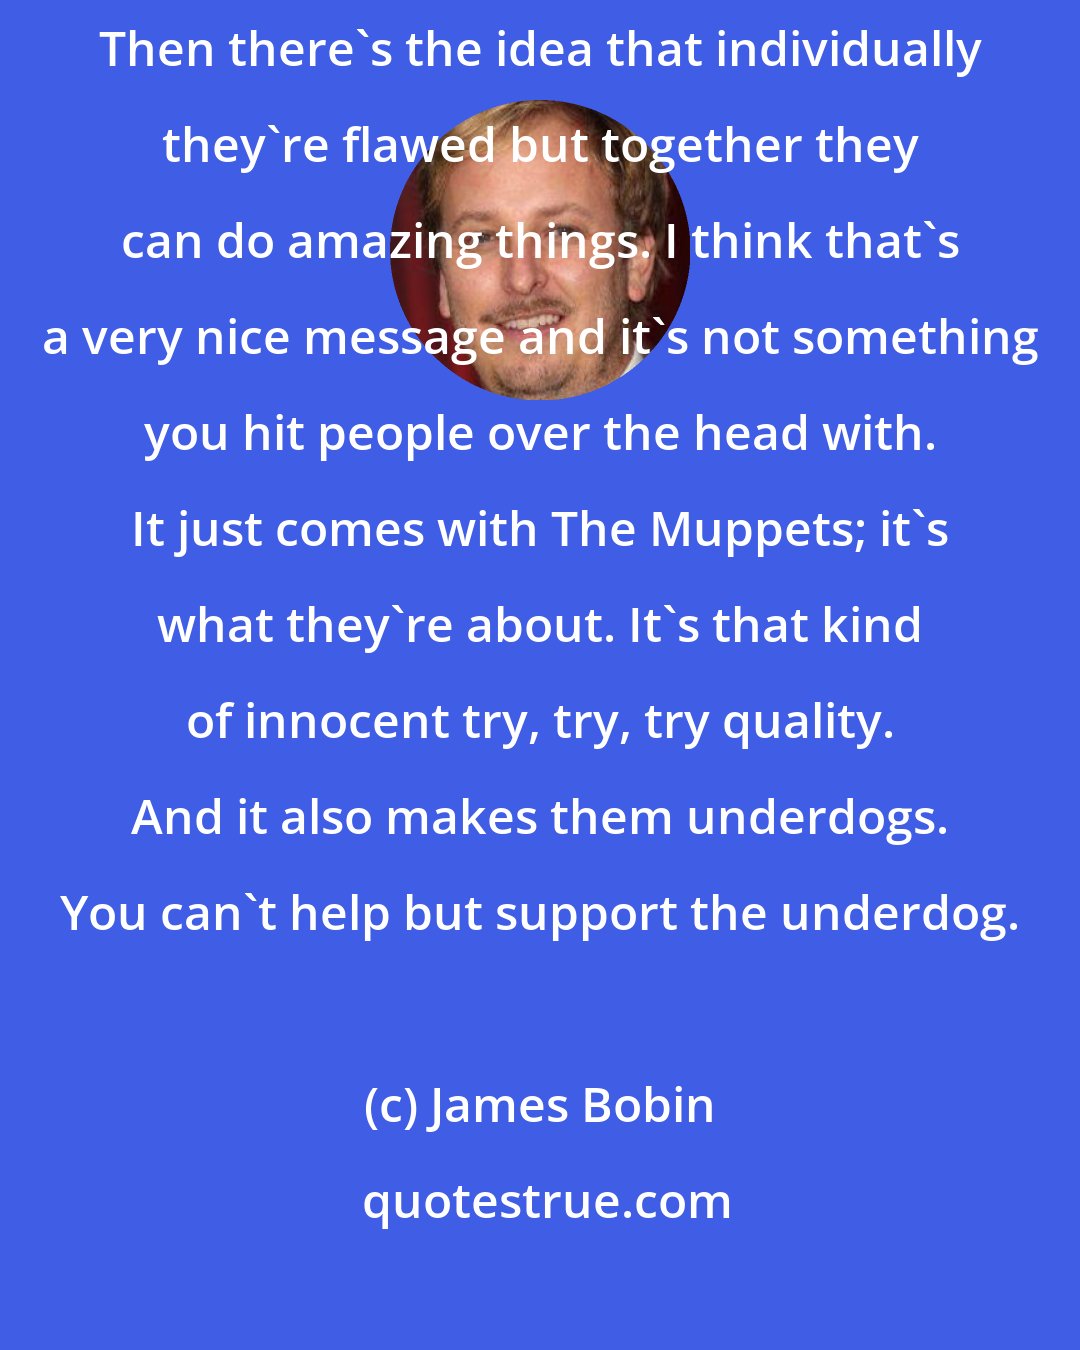 James Bobin: It doesn't matter if you're good at anything, just try your best. Then there's the idea that individually they're flawed but together they can do amazing things. I think that's a very nice message and it's not something you hit people over the head with. It just comes with The Muppets; it's what they're about. It's that kind of innocent try, try, try quality. And it also makes them underdogs. You can't help but support the underdog.